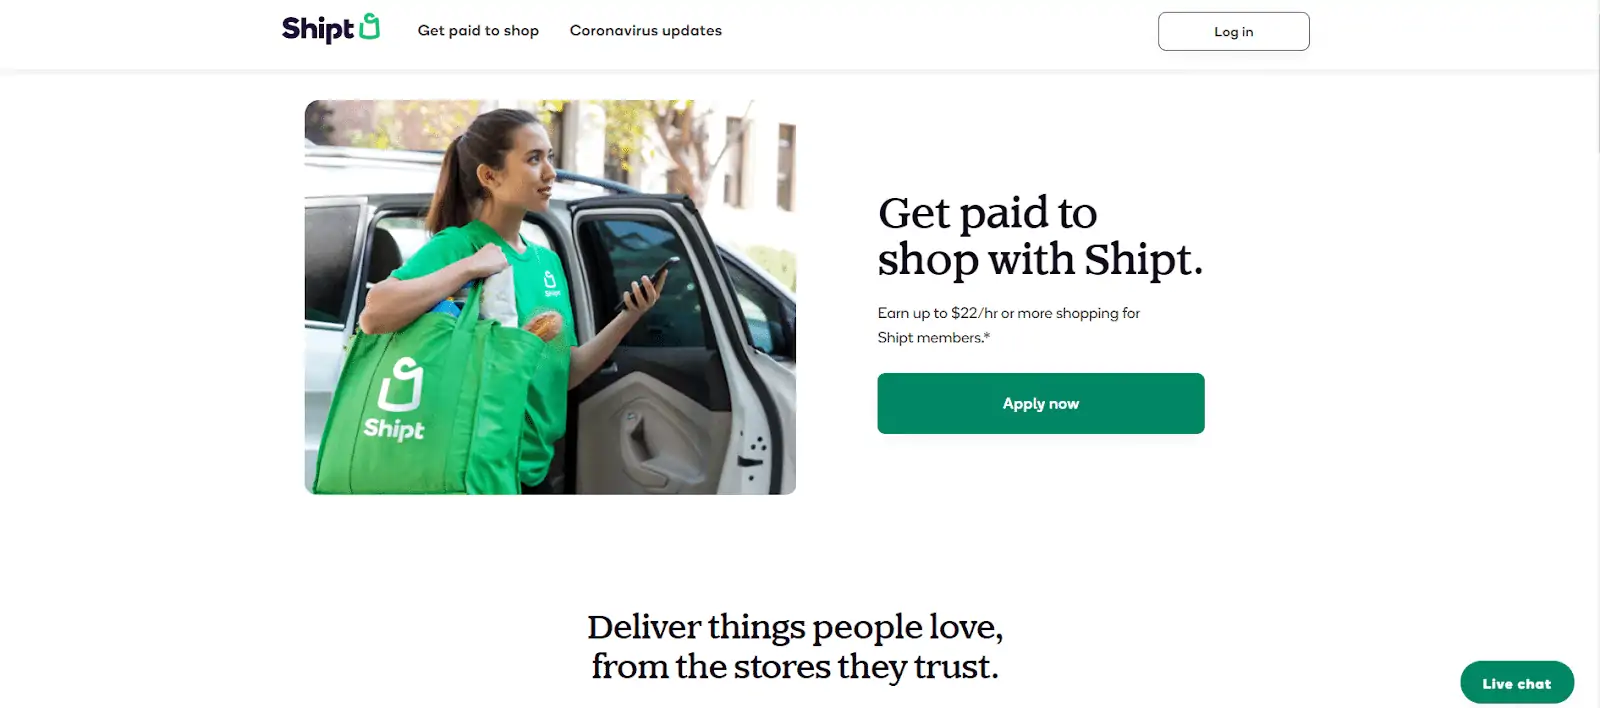 Shipt shopper pay: The page to sign up to be a shopper